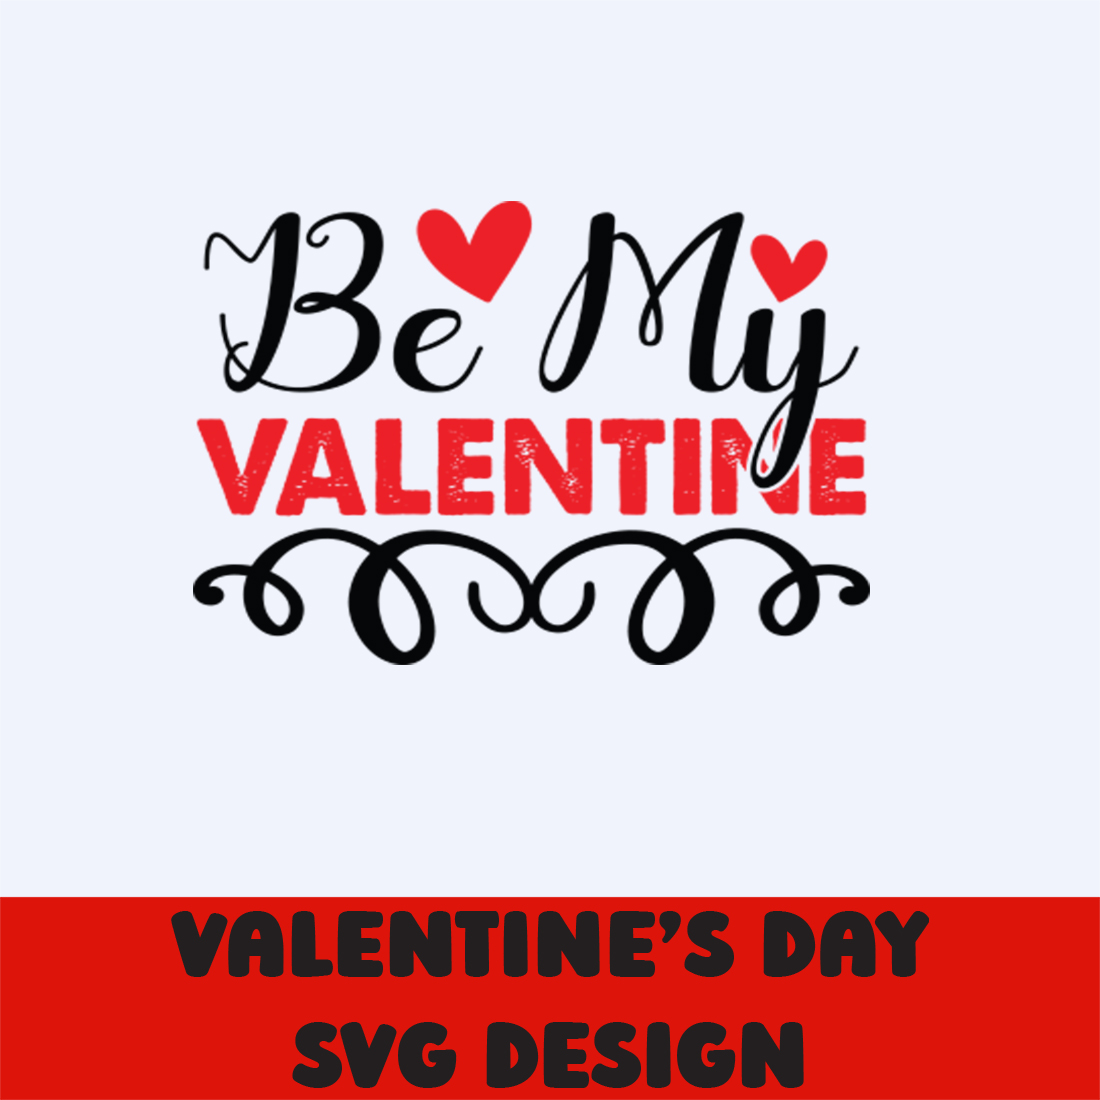 Image with exquisite printable lettering Be My Valentine